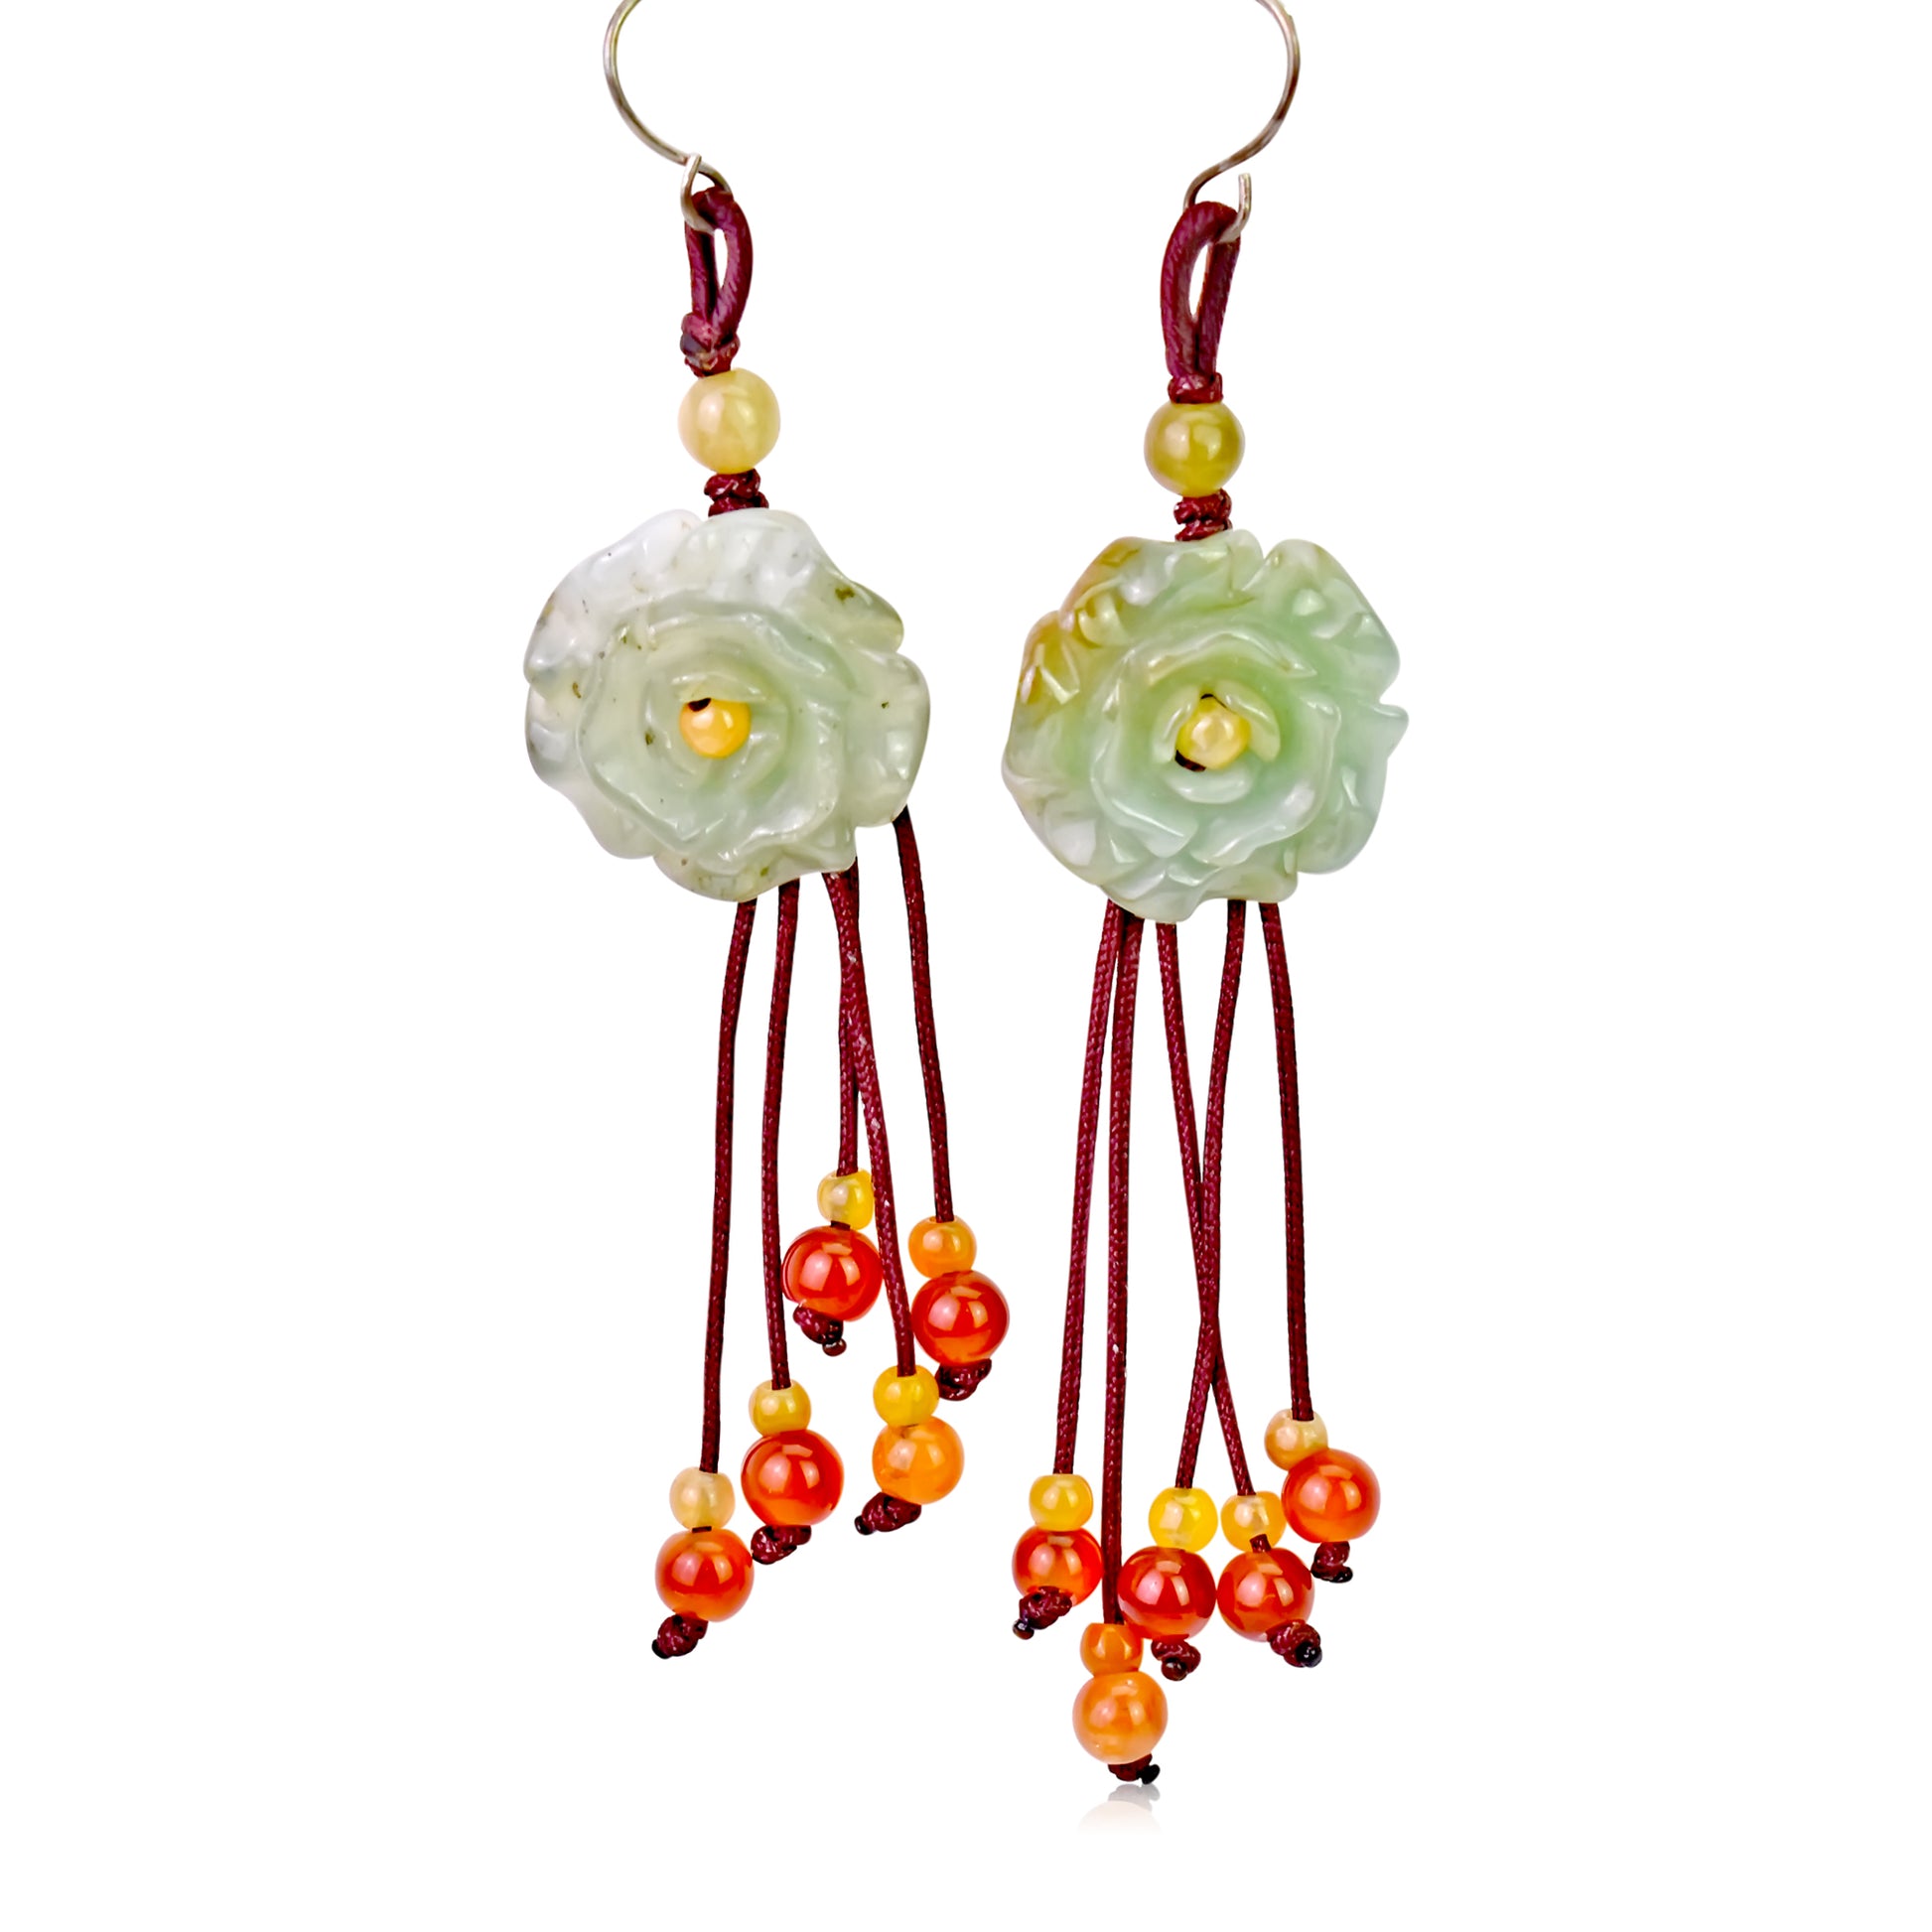 Be Unique and Stand Out with Rose Jade Pendant Earrings